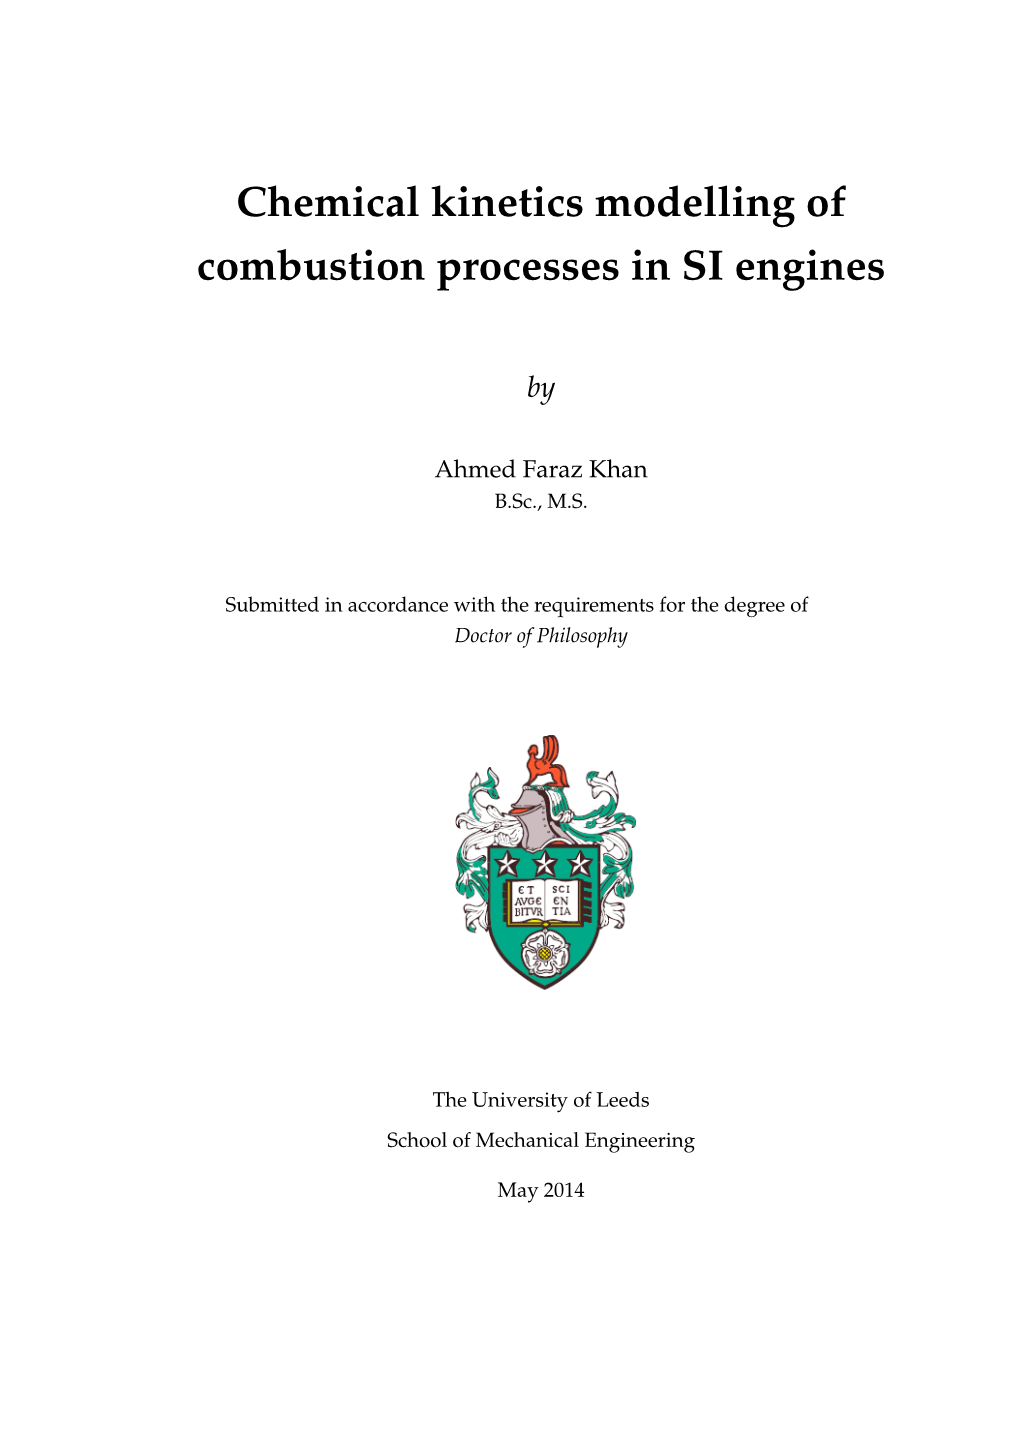 Chemical Kinetics Modelling of Combustion Processes in SI Engines